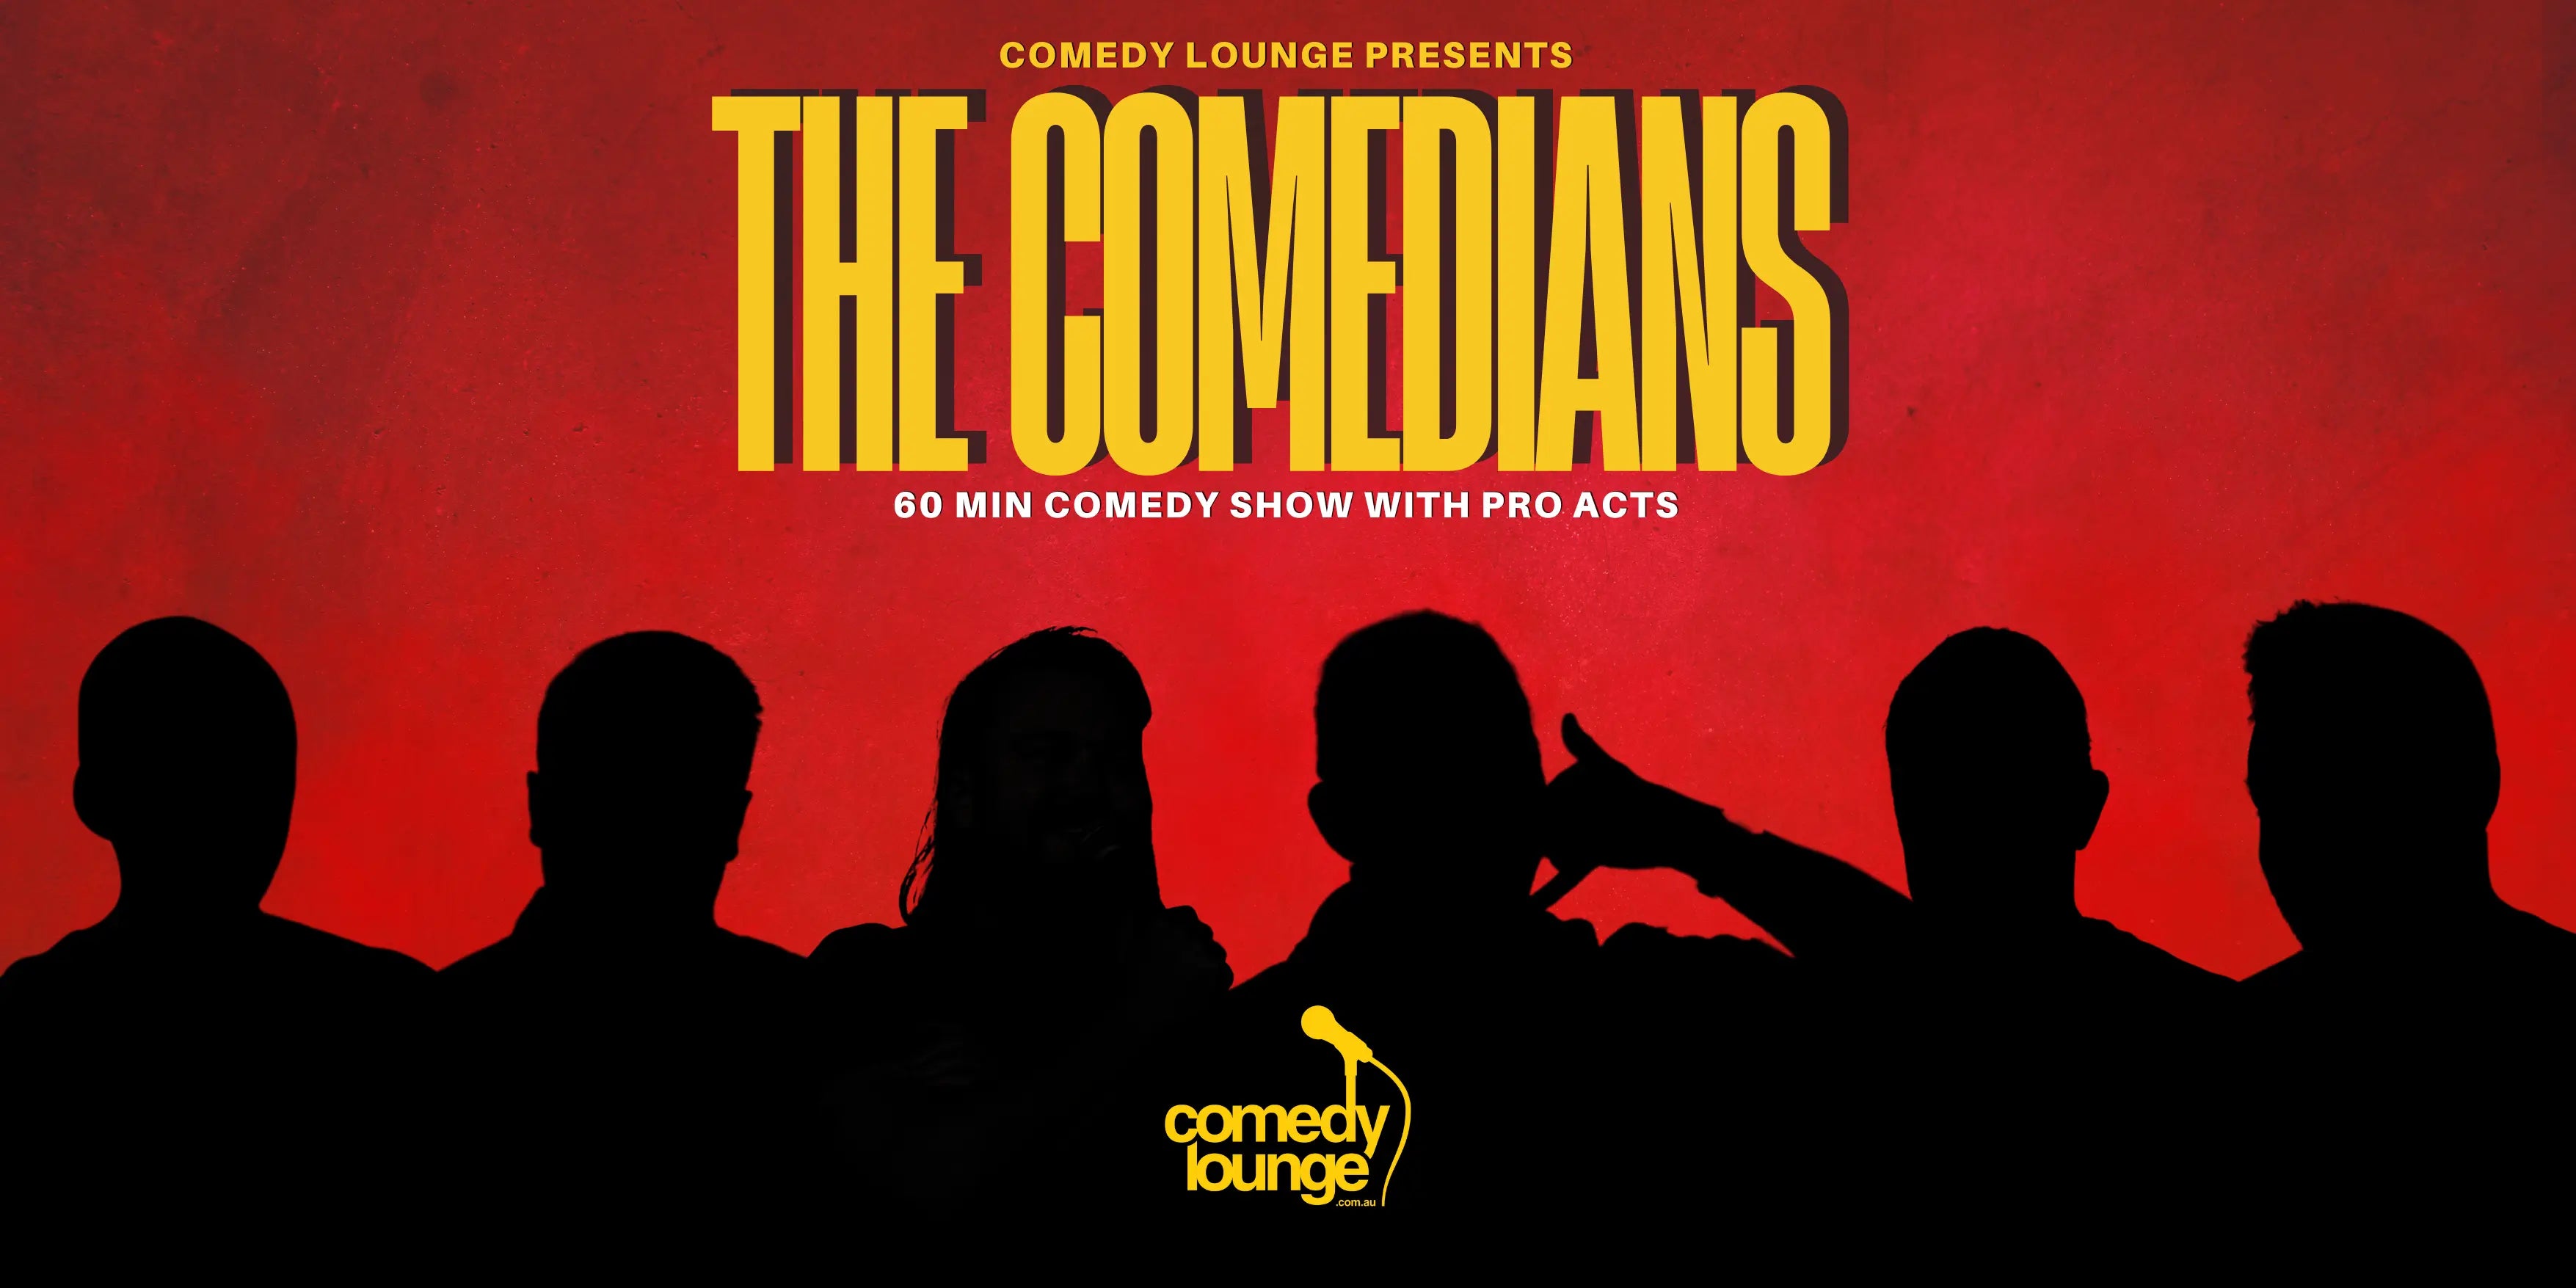 poster for 'The Comedians' Saturday show at Comedy Lounge Perth, featuring a lineup of top local and international stand-up comedians.